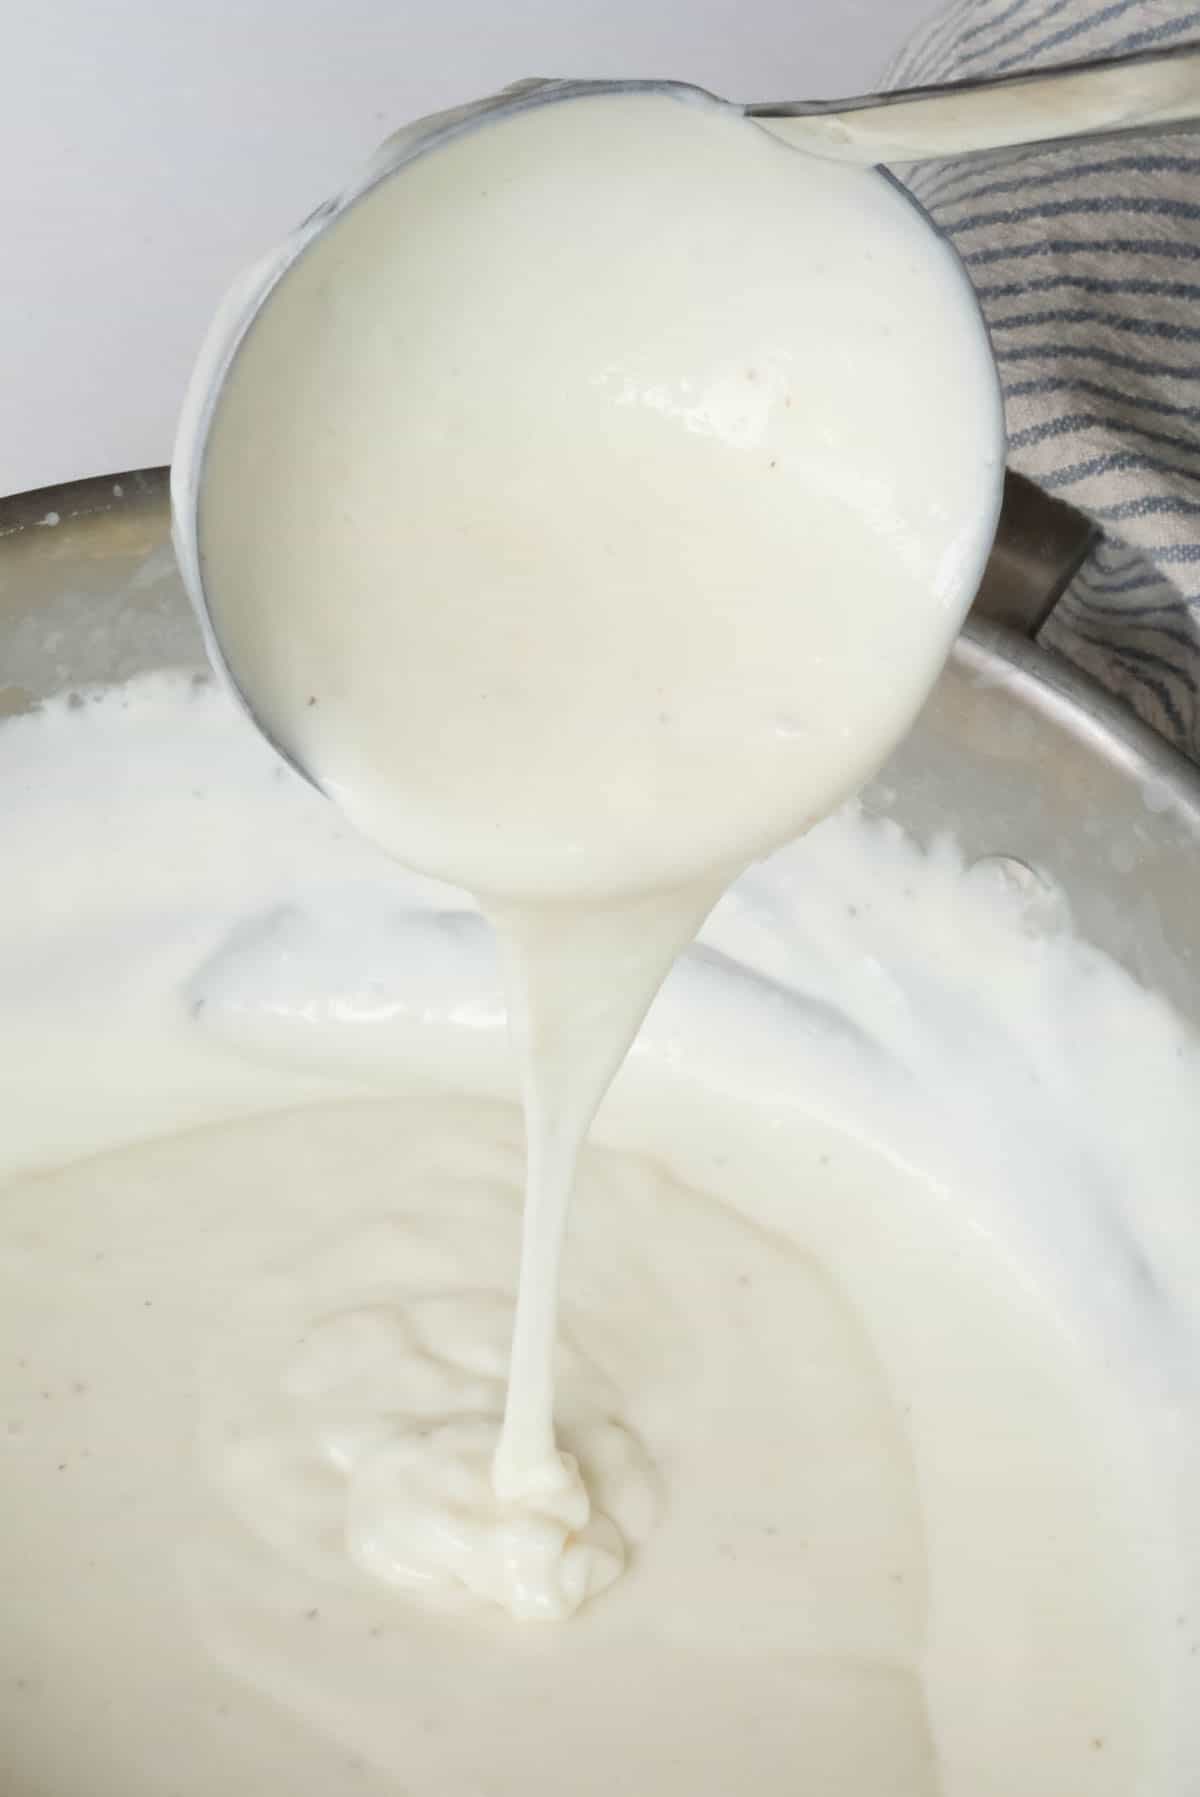 Bechamel immediately after preparing showing a thin stream of sauce pouring from a ladle into a pot.